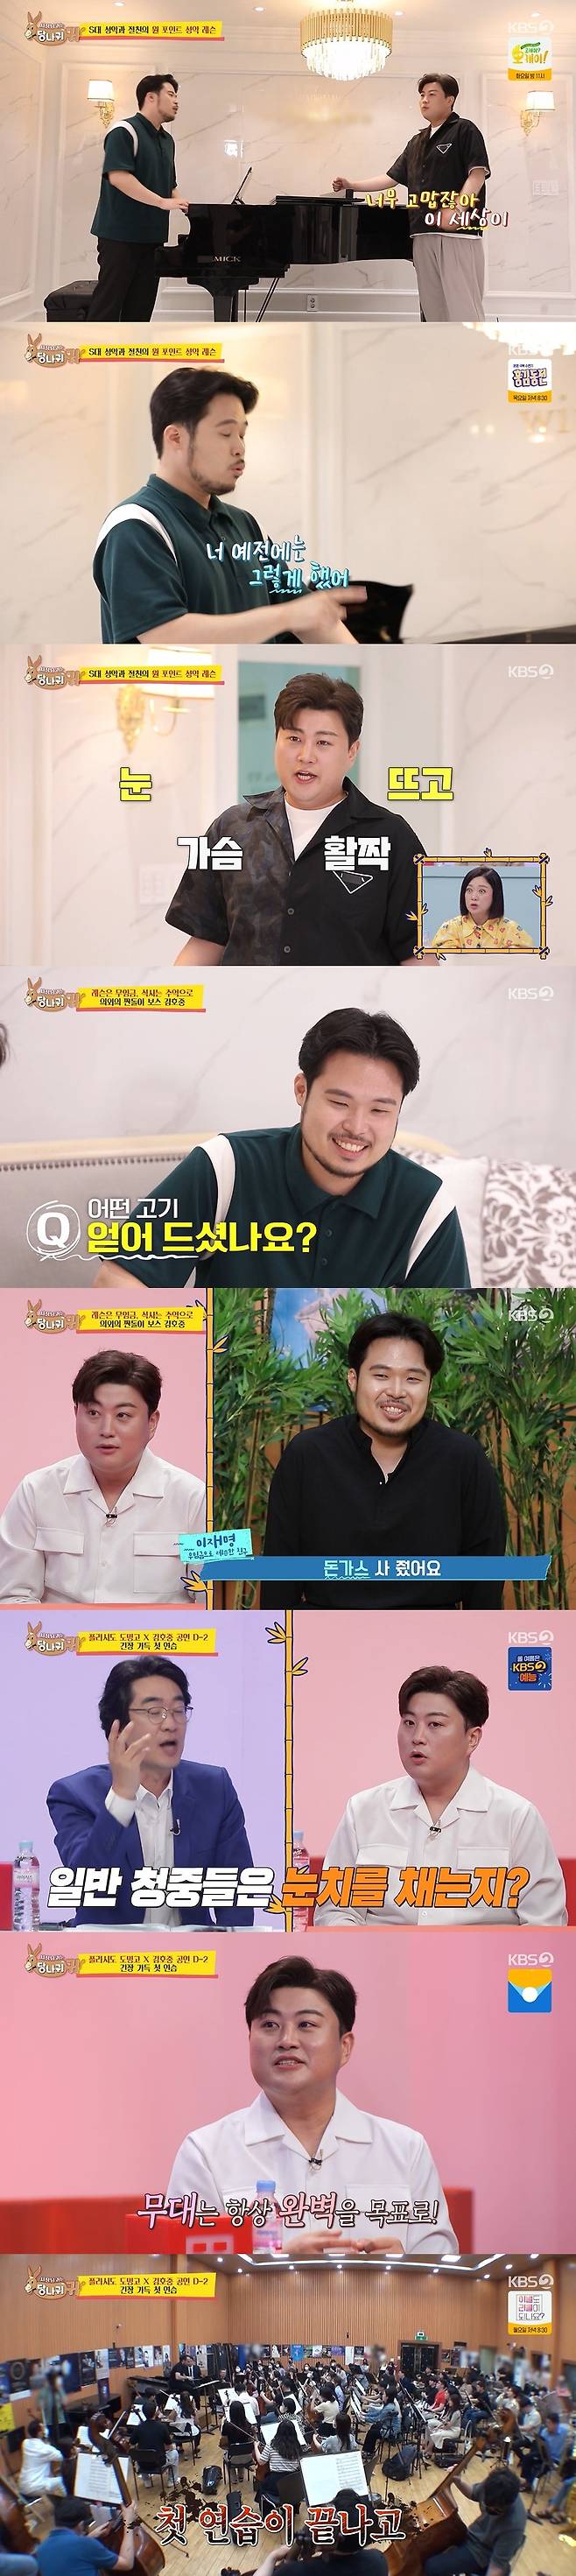 Seoul) = Kim Ho-joong said he had received a lot of checks from around when he swept the top spot in the 9M113 Konkurs competition in the past.On the afternoon of the 17th, KBS 2TV entertainment program Boss in the Mirror (hereinafter referred to as Dankey Ear), Kim Ho-joong was shown practicing for the three major World tenor placedo Domingo and London Philharmonic Orchestra.On this day, Kim Ho-joong practiced Vocal music with Friend Lee Jae-myung during his school days.Lee Jae-myung introduced the film My Paparotti Kang So-ra role is my role.So Jeon Hyun-moo laughed, saying, Gender and face are different.Kim Ho-joong introduced Lee Jae-myung as Friend who helped me get up here.Lee Jae-myung said, I went to the 9M113 Konkurs competition for college entrance examination. If I went to the competition, (Kim) Ho-jung was the first and I was the second.Kim Ho-joong said he started Vocal music and swept the top 9M113 Konkurs nationwide in 50 days, which led to a lot of jealousy.Kim Ho-joong said, The score was gone two weeks before 9M113 Konkurs. At the last rehearsal of 9M113 Konkurs, the accompanist teacher said that the score was gone, but I found the score in front of the retroom Waste container.Kim Ho-joong asked longtime Friend Lee Jae-myung to practice ahead of collaboration with tenor singer Domingo.I got to stand on stage with my World Tenor Domingo teacher, he said.Lee Jae-myung gave Kim Ho-joong advice such as when playing Vocal music, you should open your eyes wide and you should be in a big position.Kim Ho-joong expressed gratitude for renewing (this) that I have seen for a long time, but Lee Jae-myung is Lee Jae-myung and dragging (me) towing car on stage with Domingo teacher.However, Kim Ho-joong was very nervous, saying, I was nervous when I played the London Philharmonic Orchestra while the sound was in a place where I was singing, but I could not hear my sound.Kim Ho-joong has been focused on whether he can finish a live concert with tenor Placido Domingo and world-class soprano Jennifer Rauli.